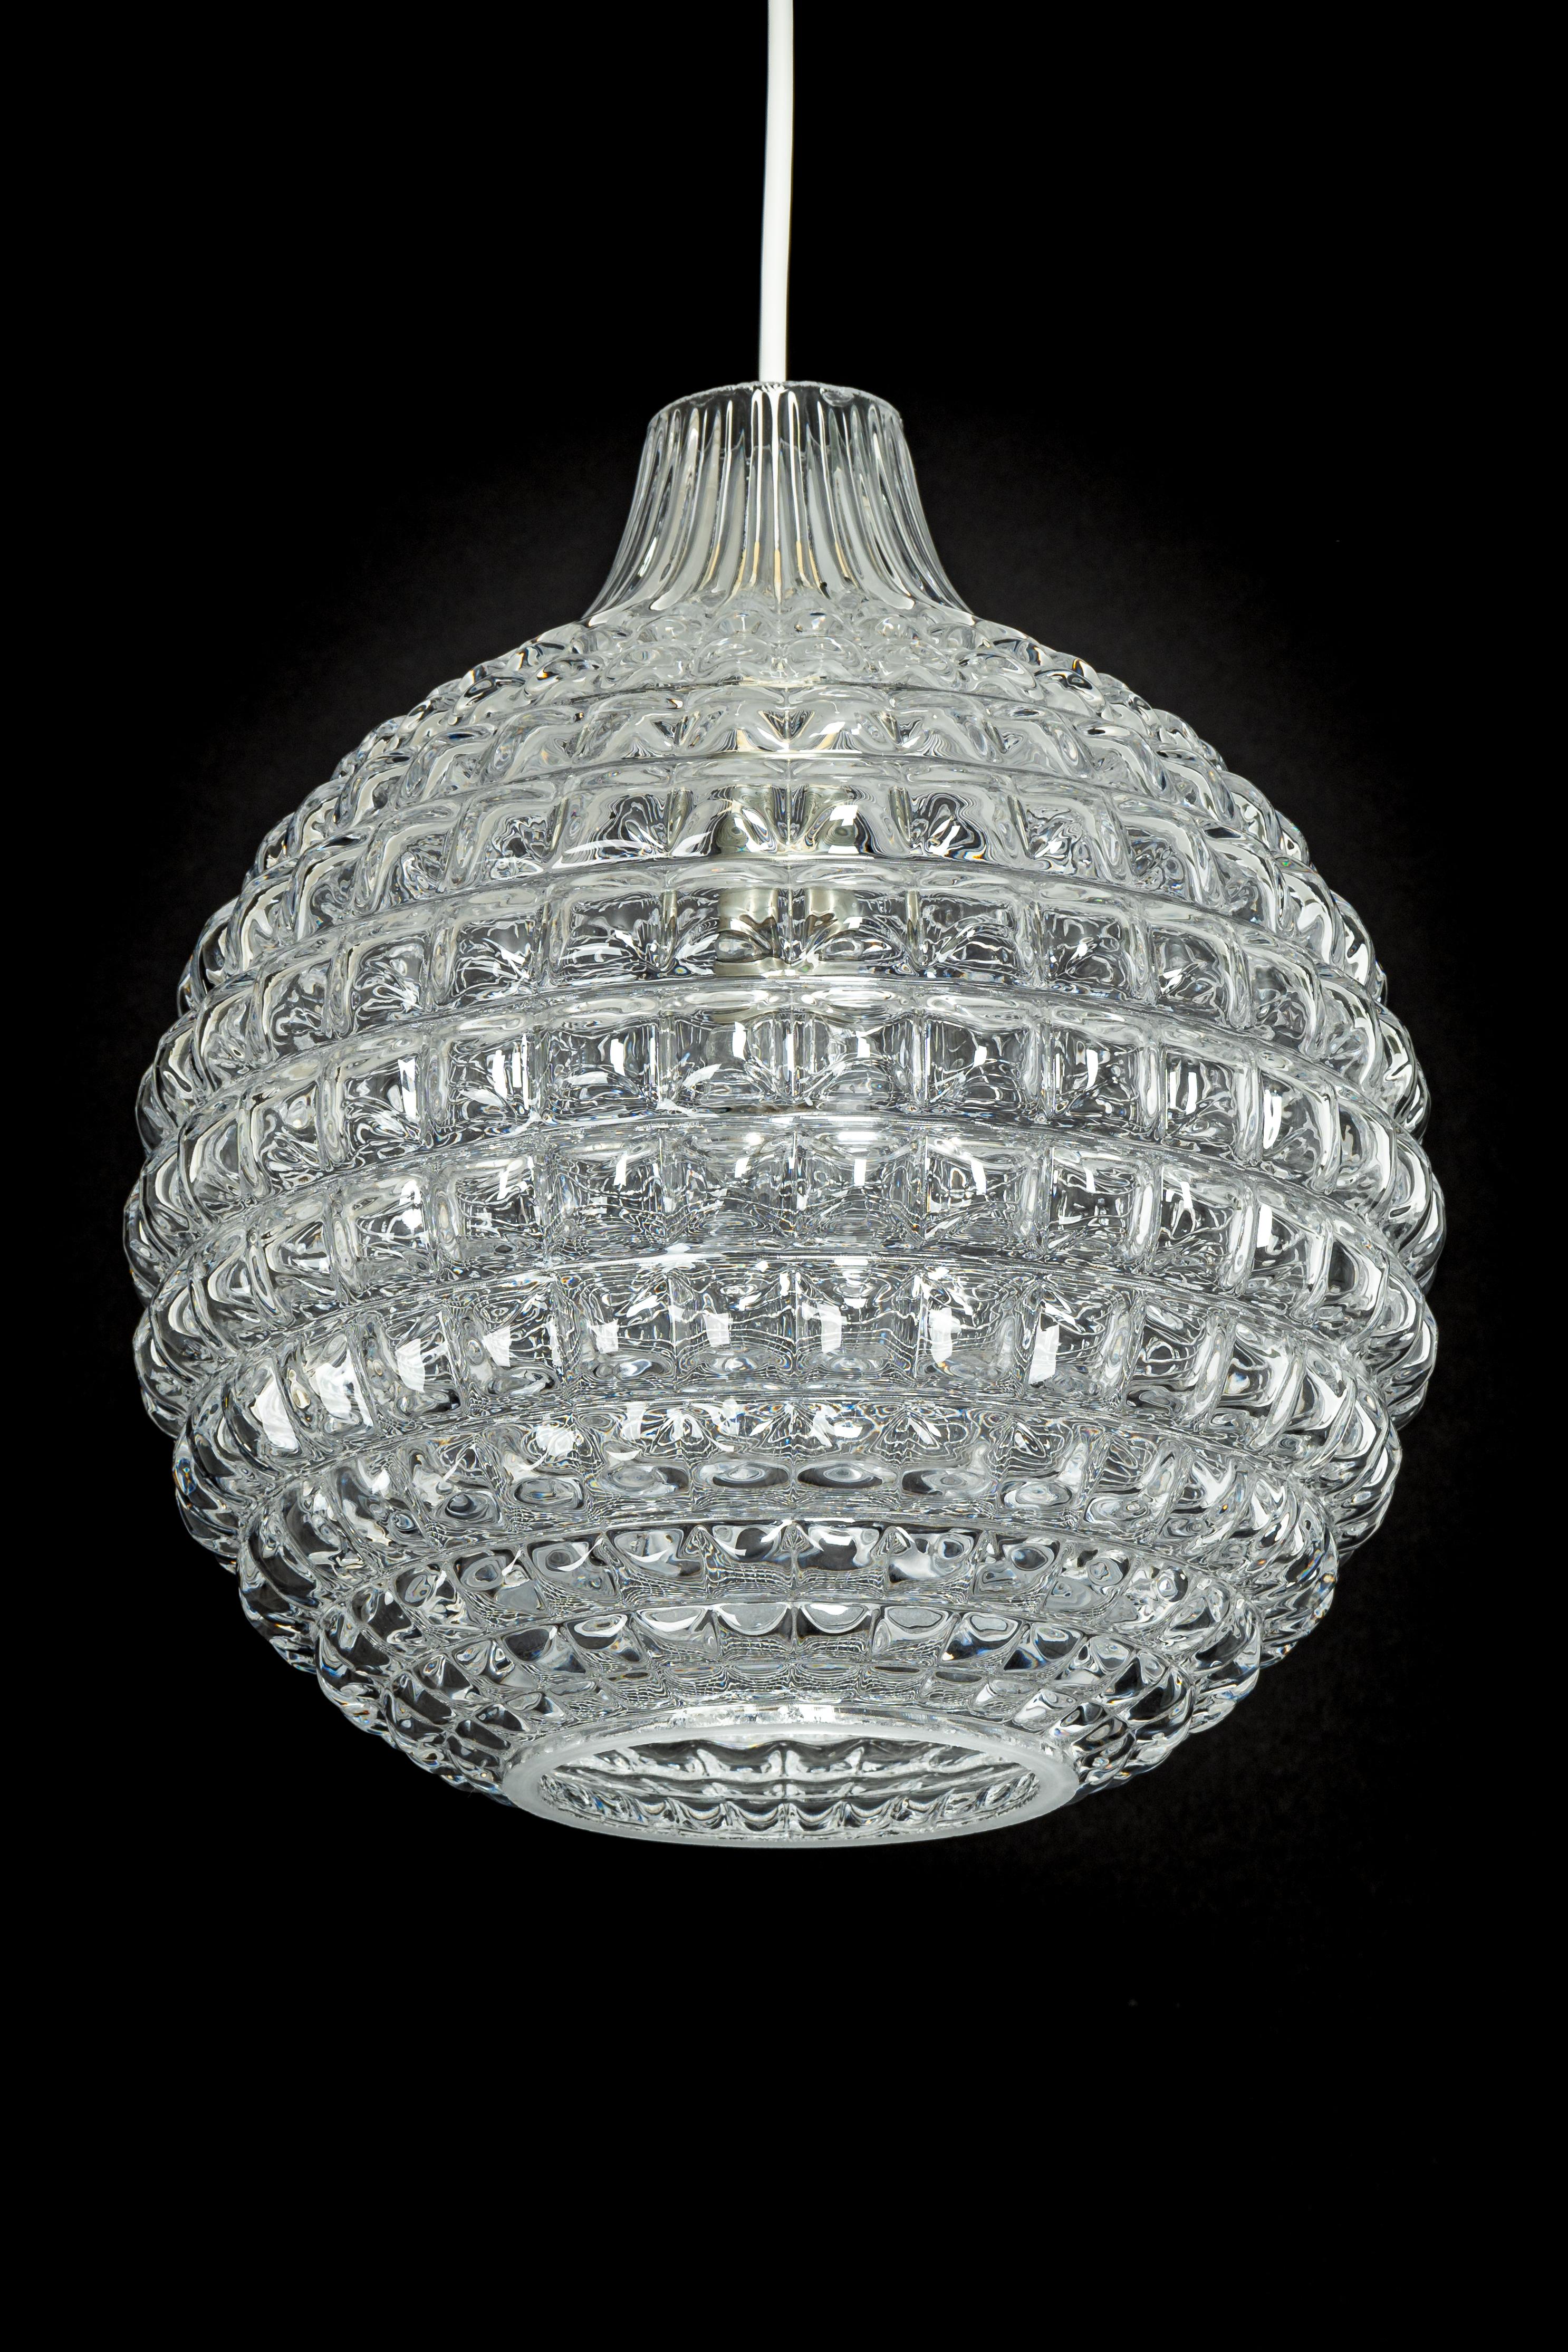 1 of 2 Stunning Crystal Glass Pendant Light, Peill & Putzler, Germany, 1970s For Sale 2